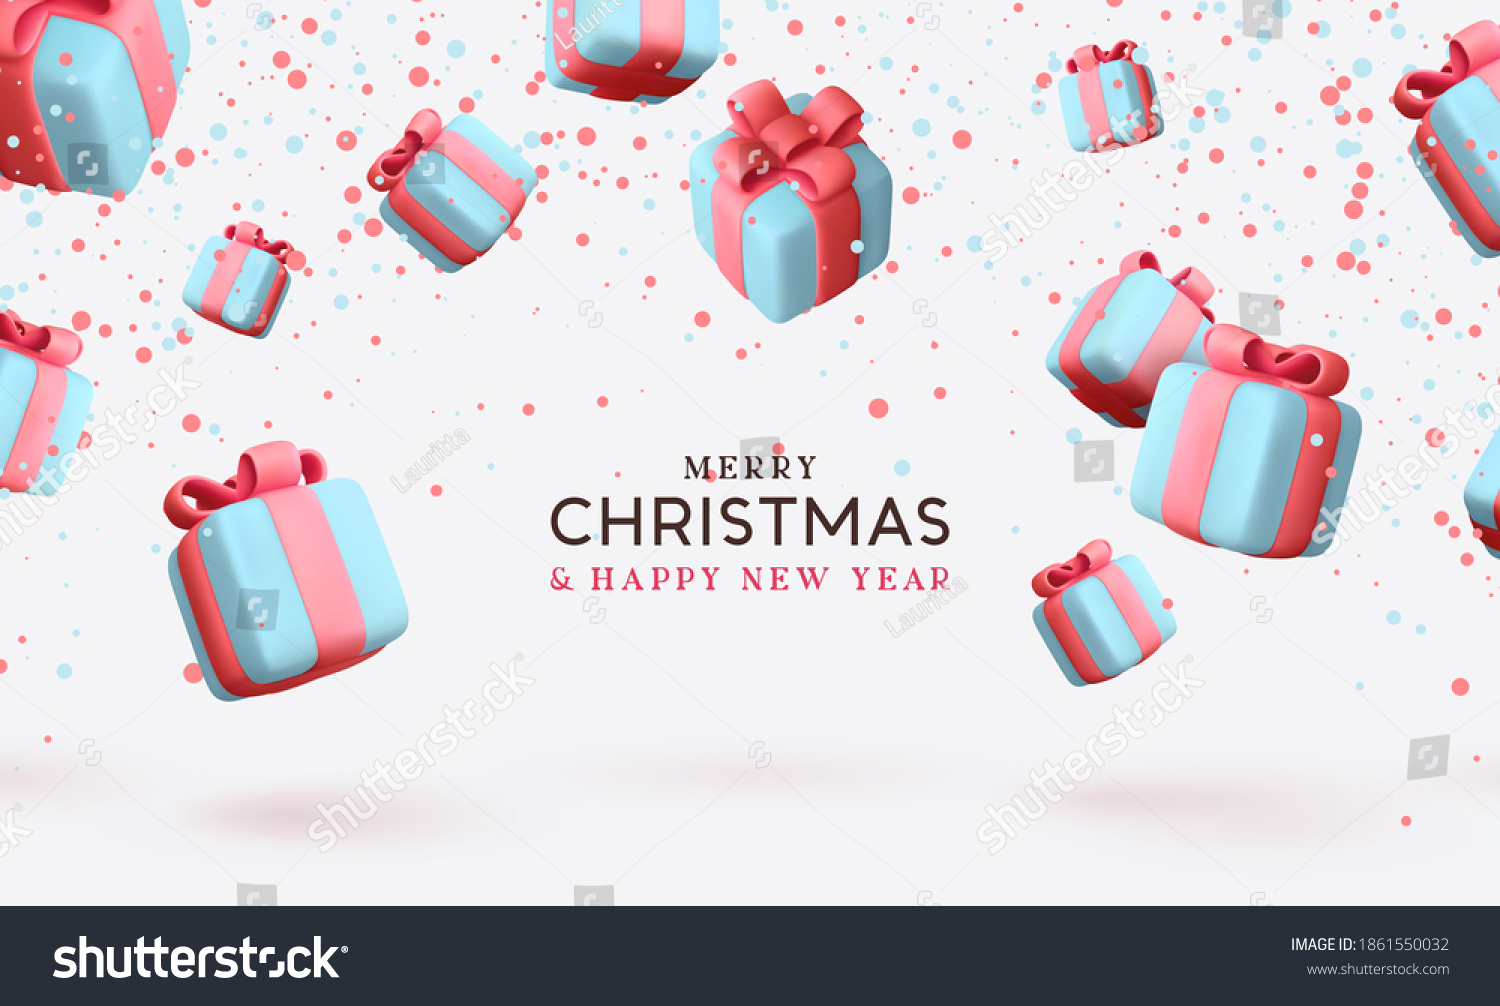 Merry Christmas and Happy New Year. Background with realistic festive gifts box. Xmas present. Blue boxes fall effect. Holiday gift surprise banner, web poster, flyer, stylish brochure, greeting card #1861550032